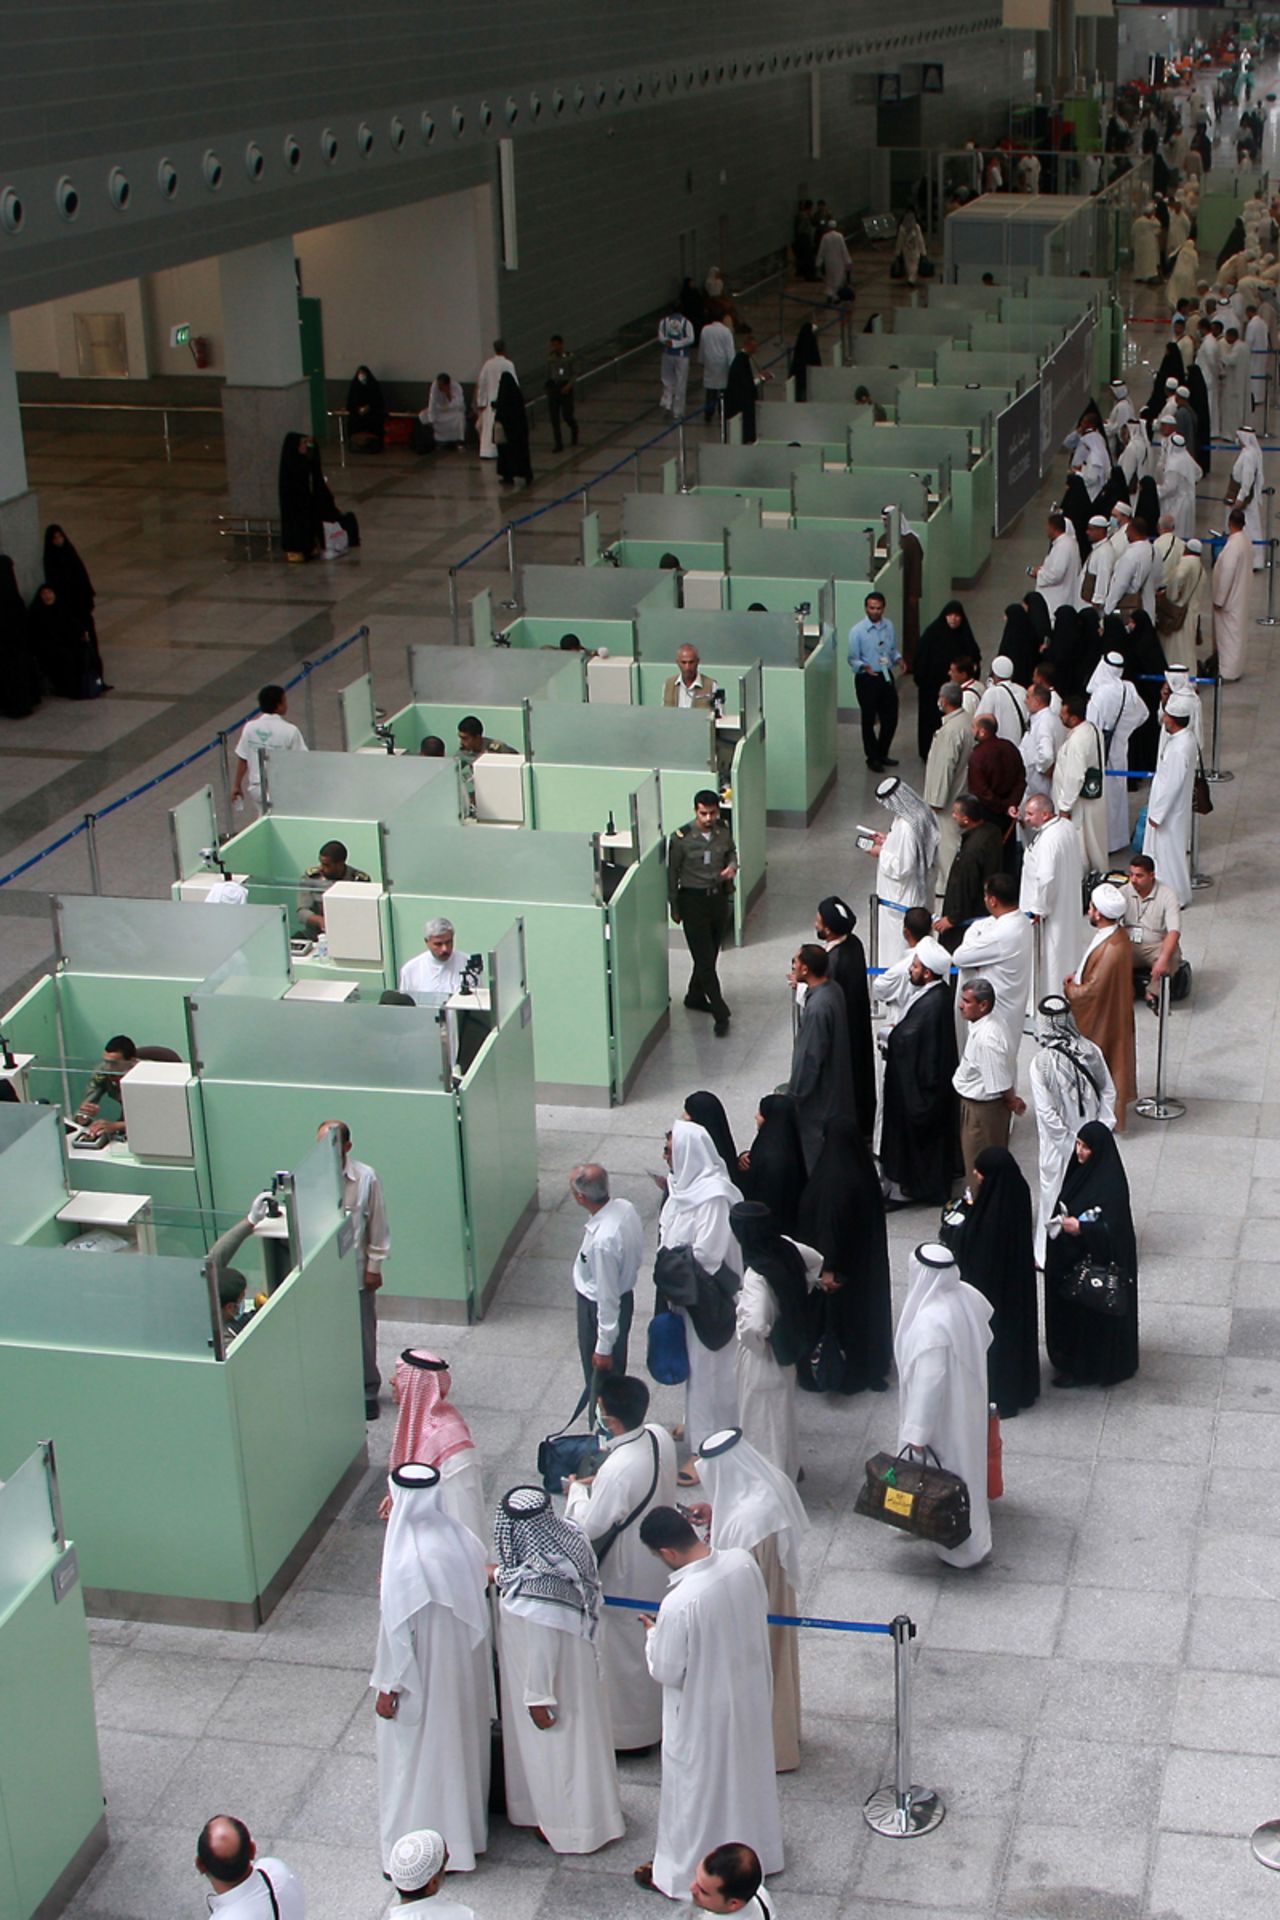 "From smoking in non-smoking areas to the bathroom odor wafting out into the lounges, few people sang praises after spending time here," said Sleeping in Airports. A number of voters suggested booking layovers elsewhere -- at all costs. There is some positive news -- the new Jeddah Airport is scheduled to open mid-2016. 